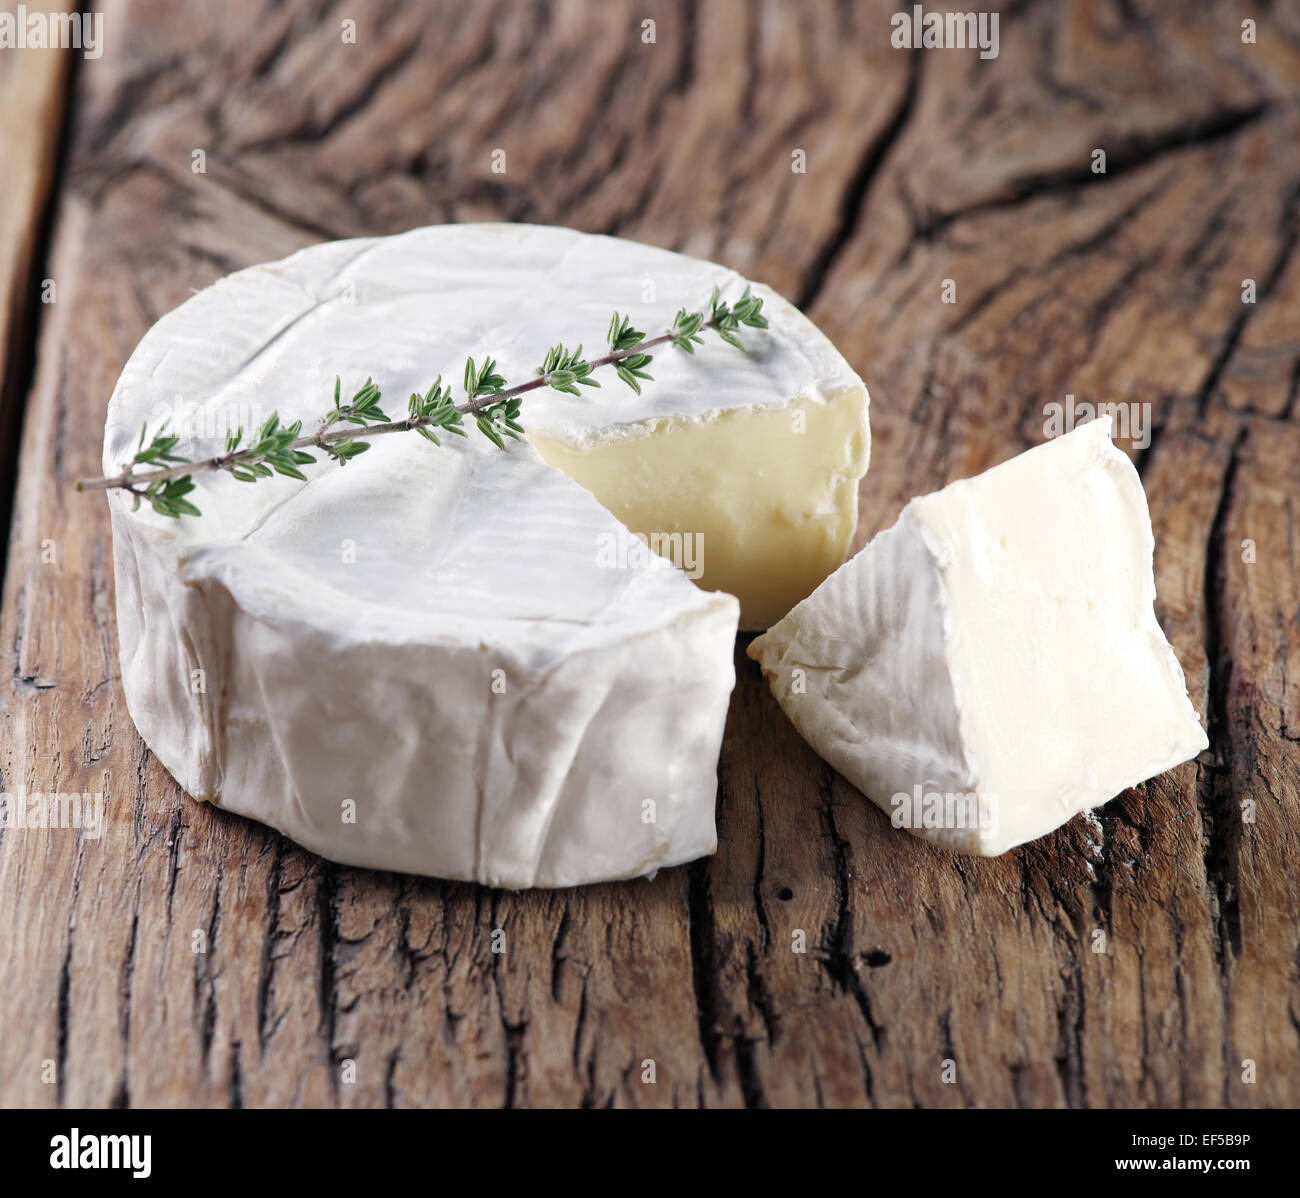 Camembert cheese on old wooden table. Stock Photo